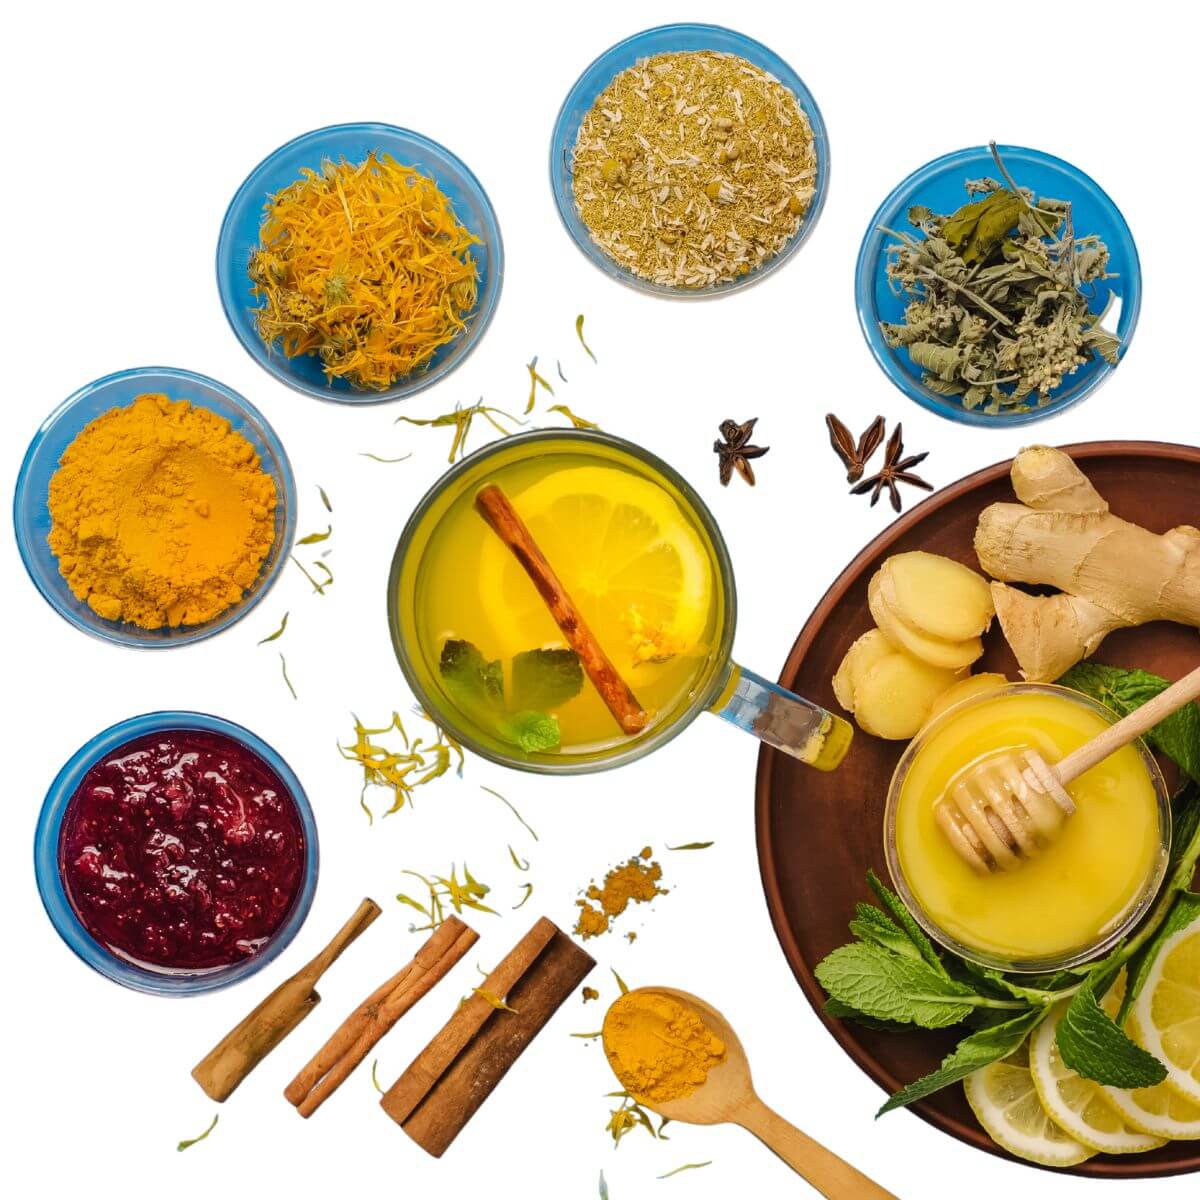 Immune boosting herbs to strengthen the body and for helping the immune system.